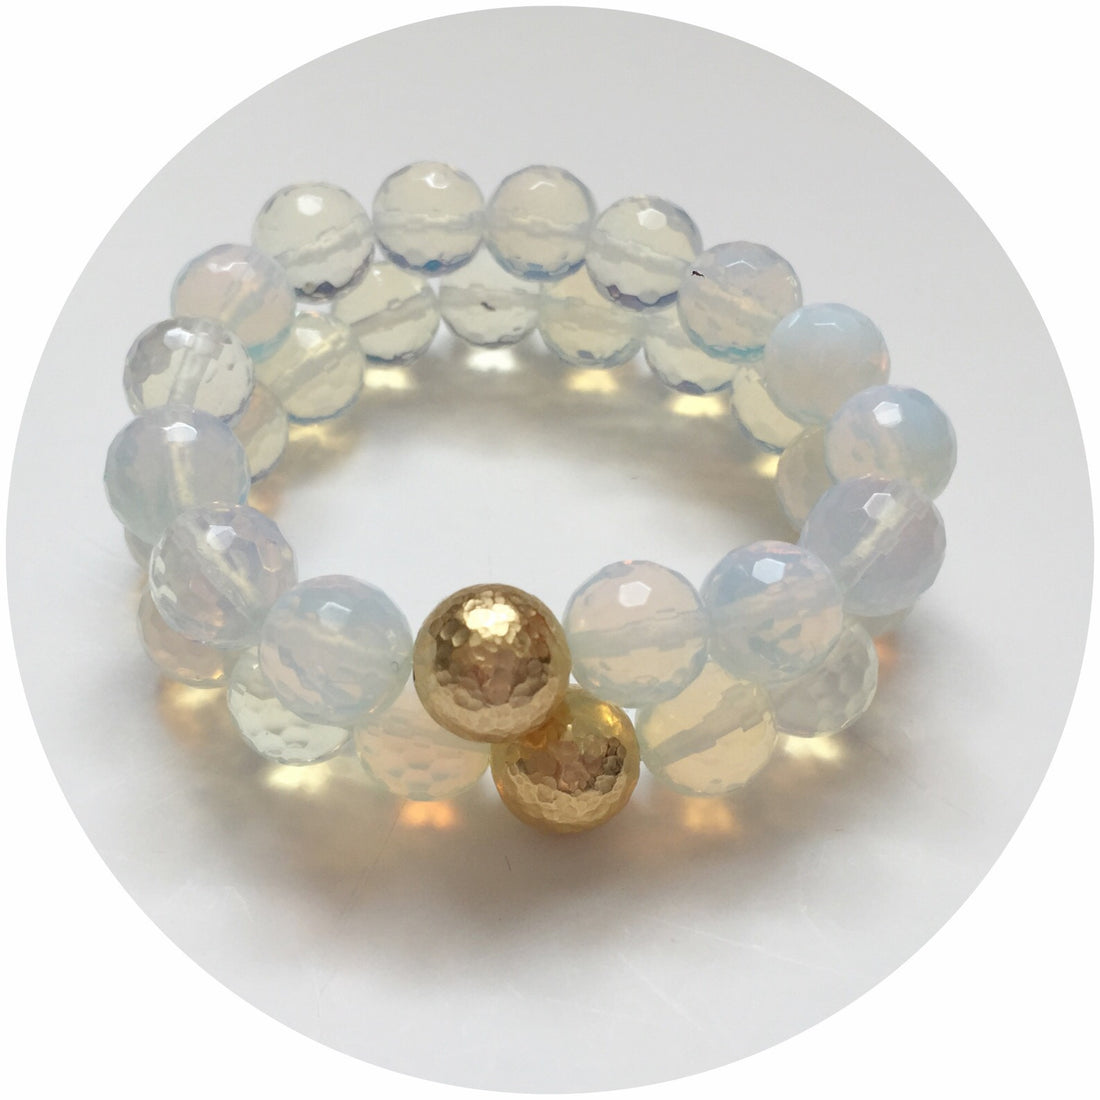 Opalite with Hammered Gold Accent - Oriana Lamarca LLC